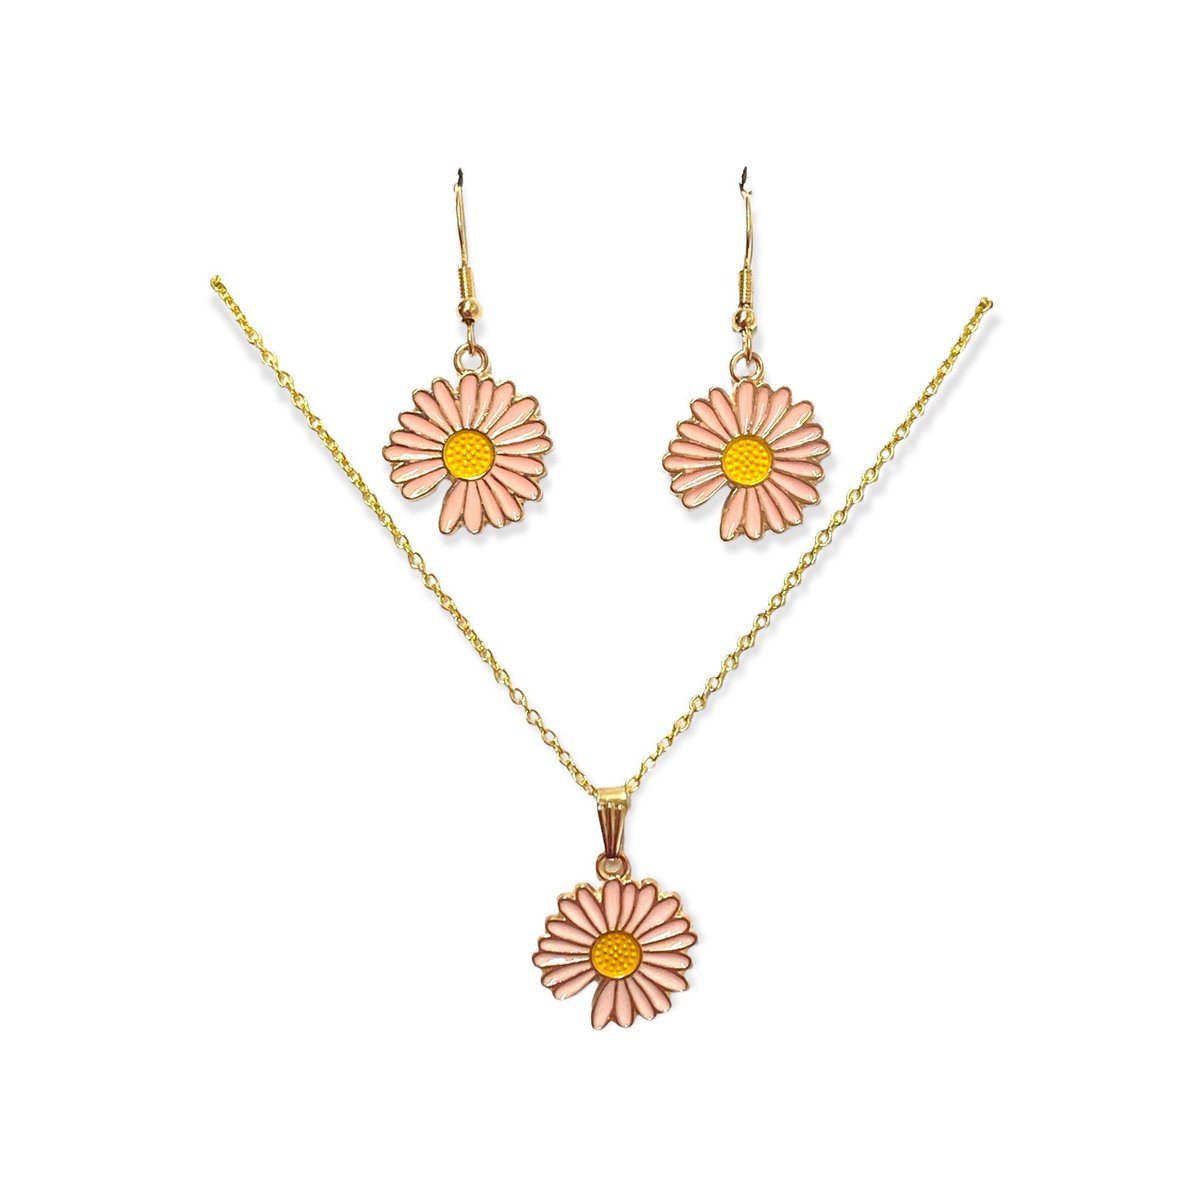 Excited to share this item from my #etsy shop: Peachy Pink Daisy Necklace and Earrings Set etsy.me/3HT3S0O
#daisyjewelry